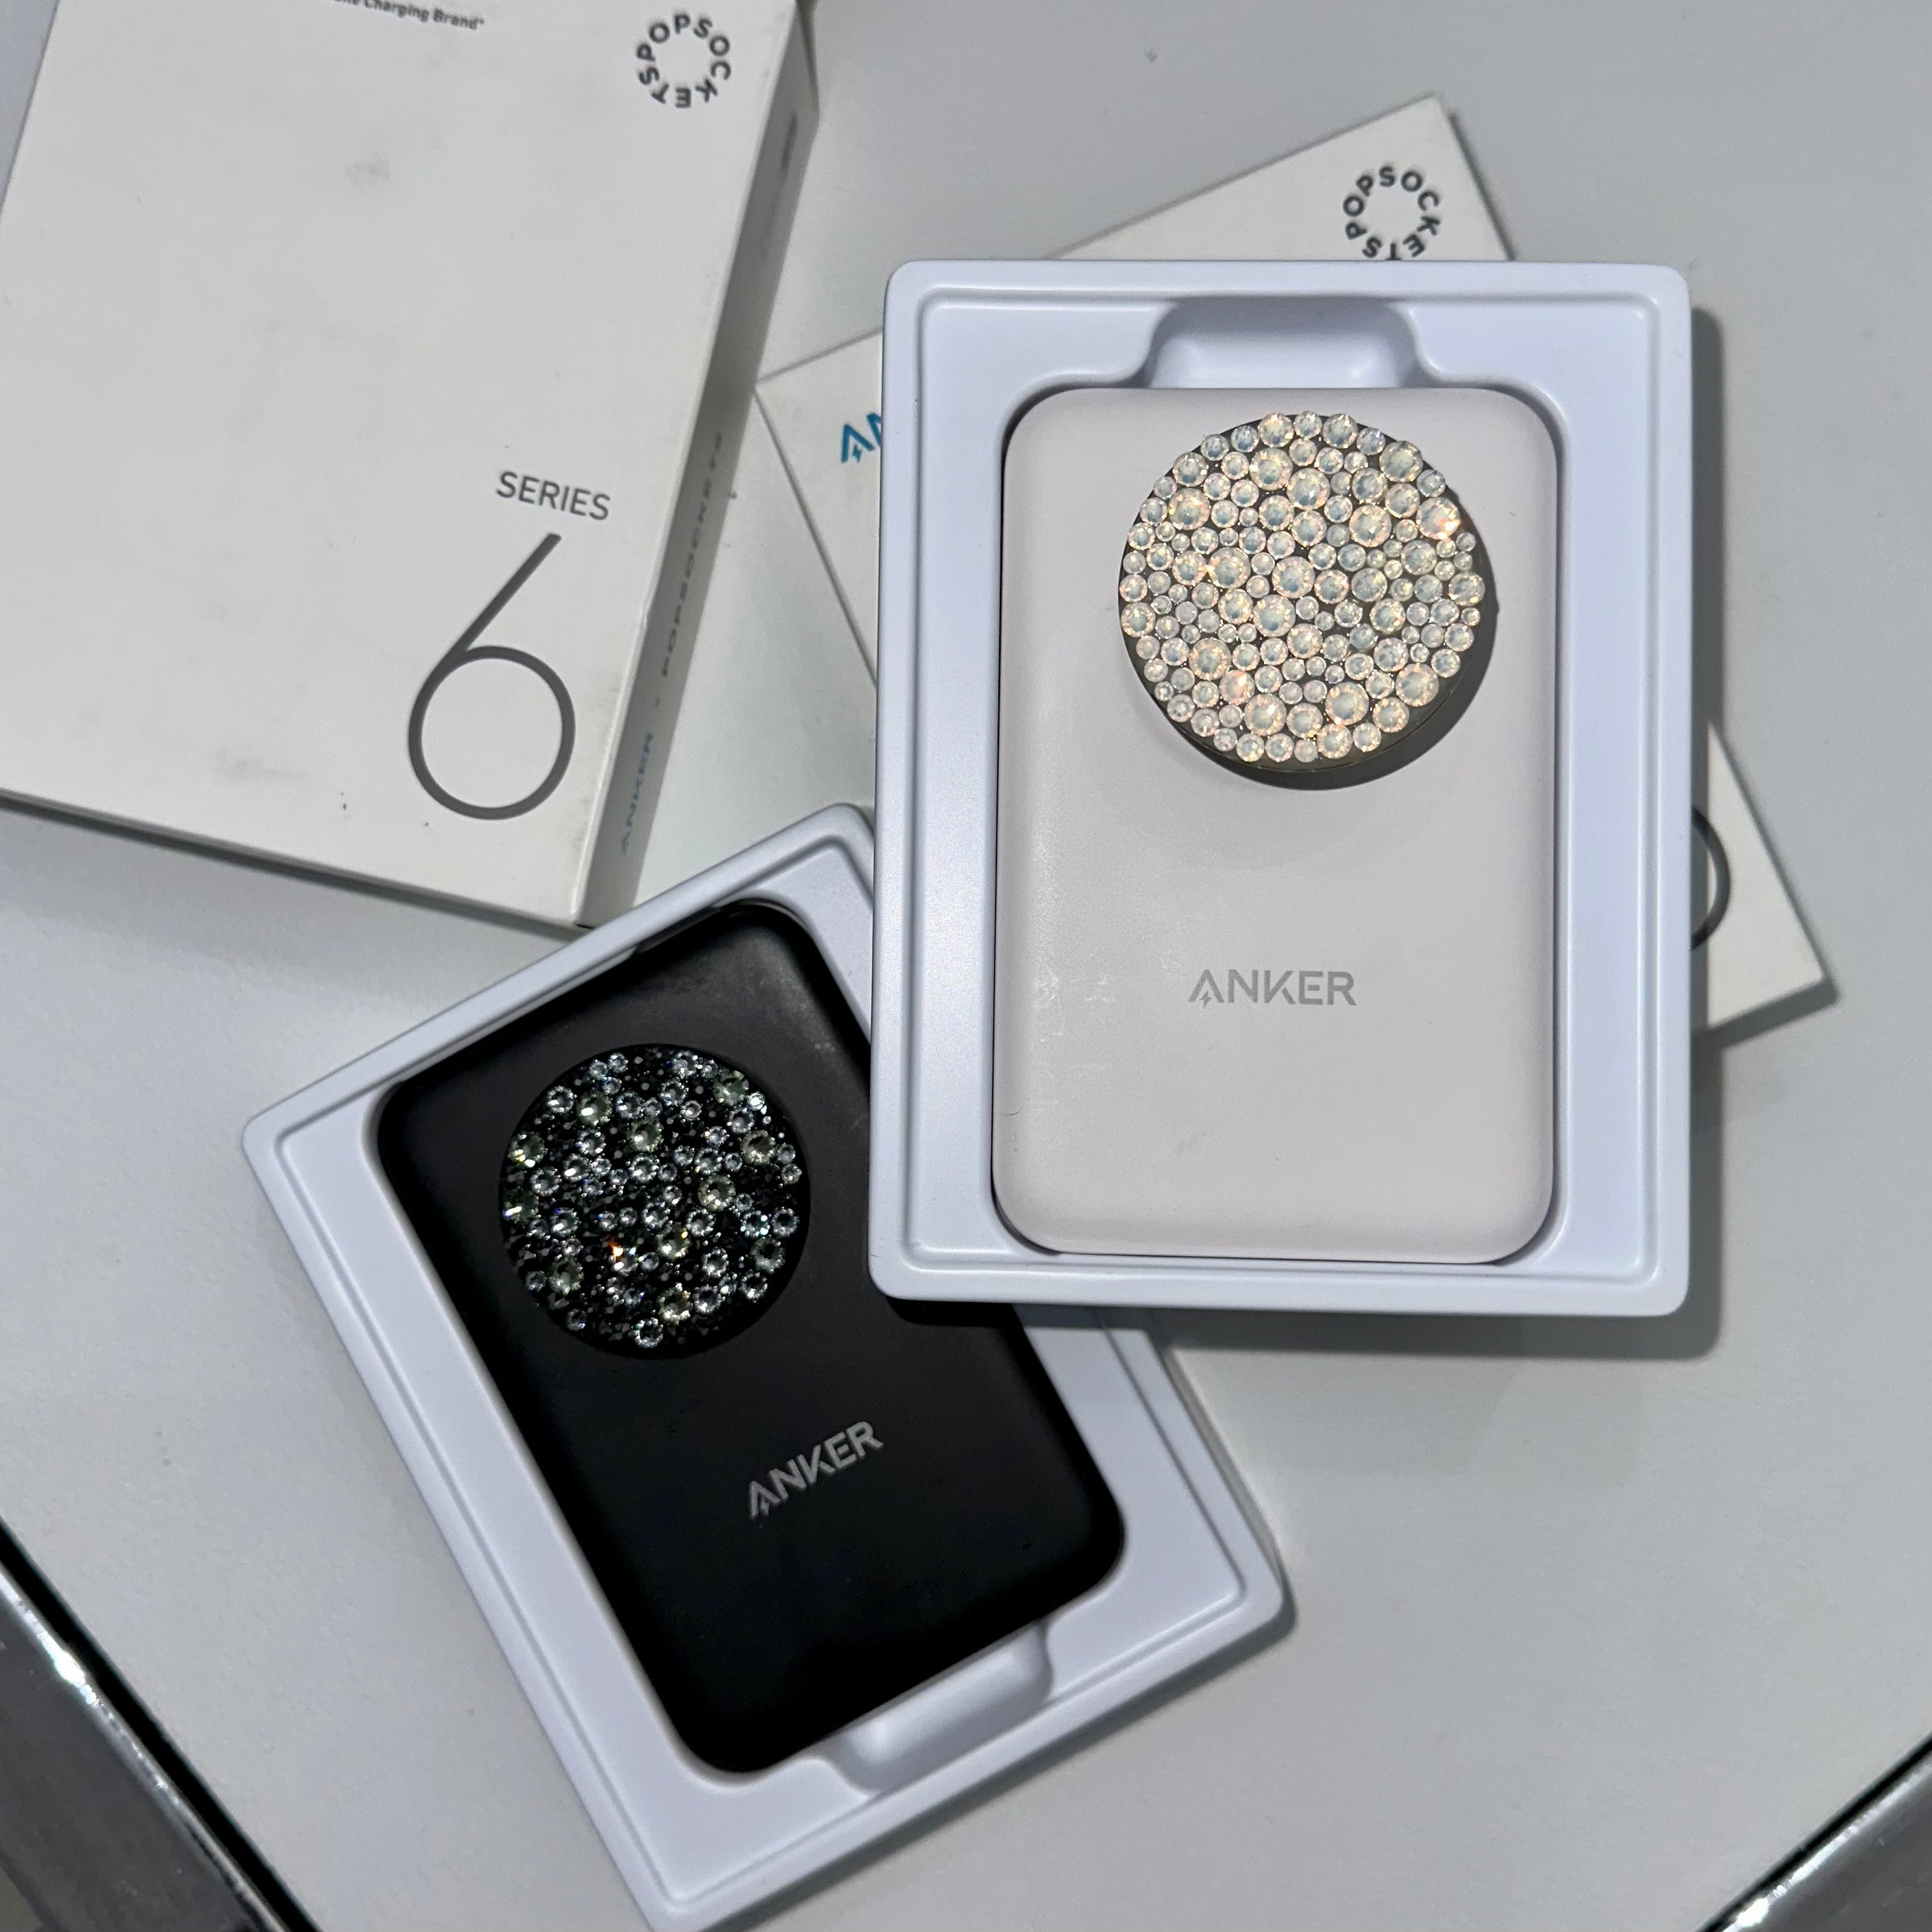 PopSocket x Anker PowerCore MagGo 5k Portable MagSafe Charger and